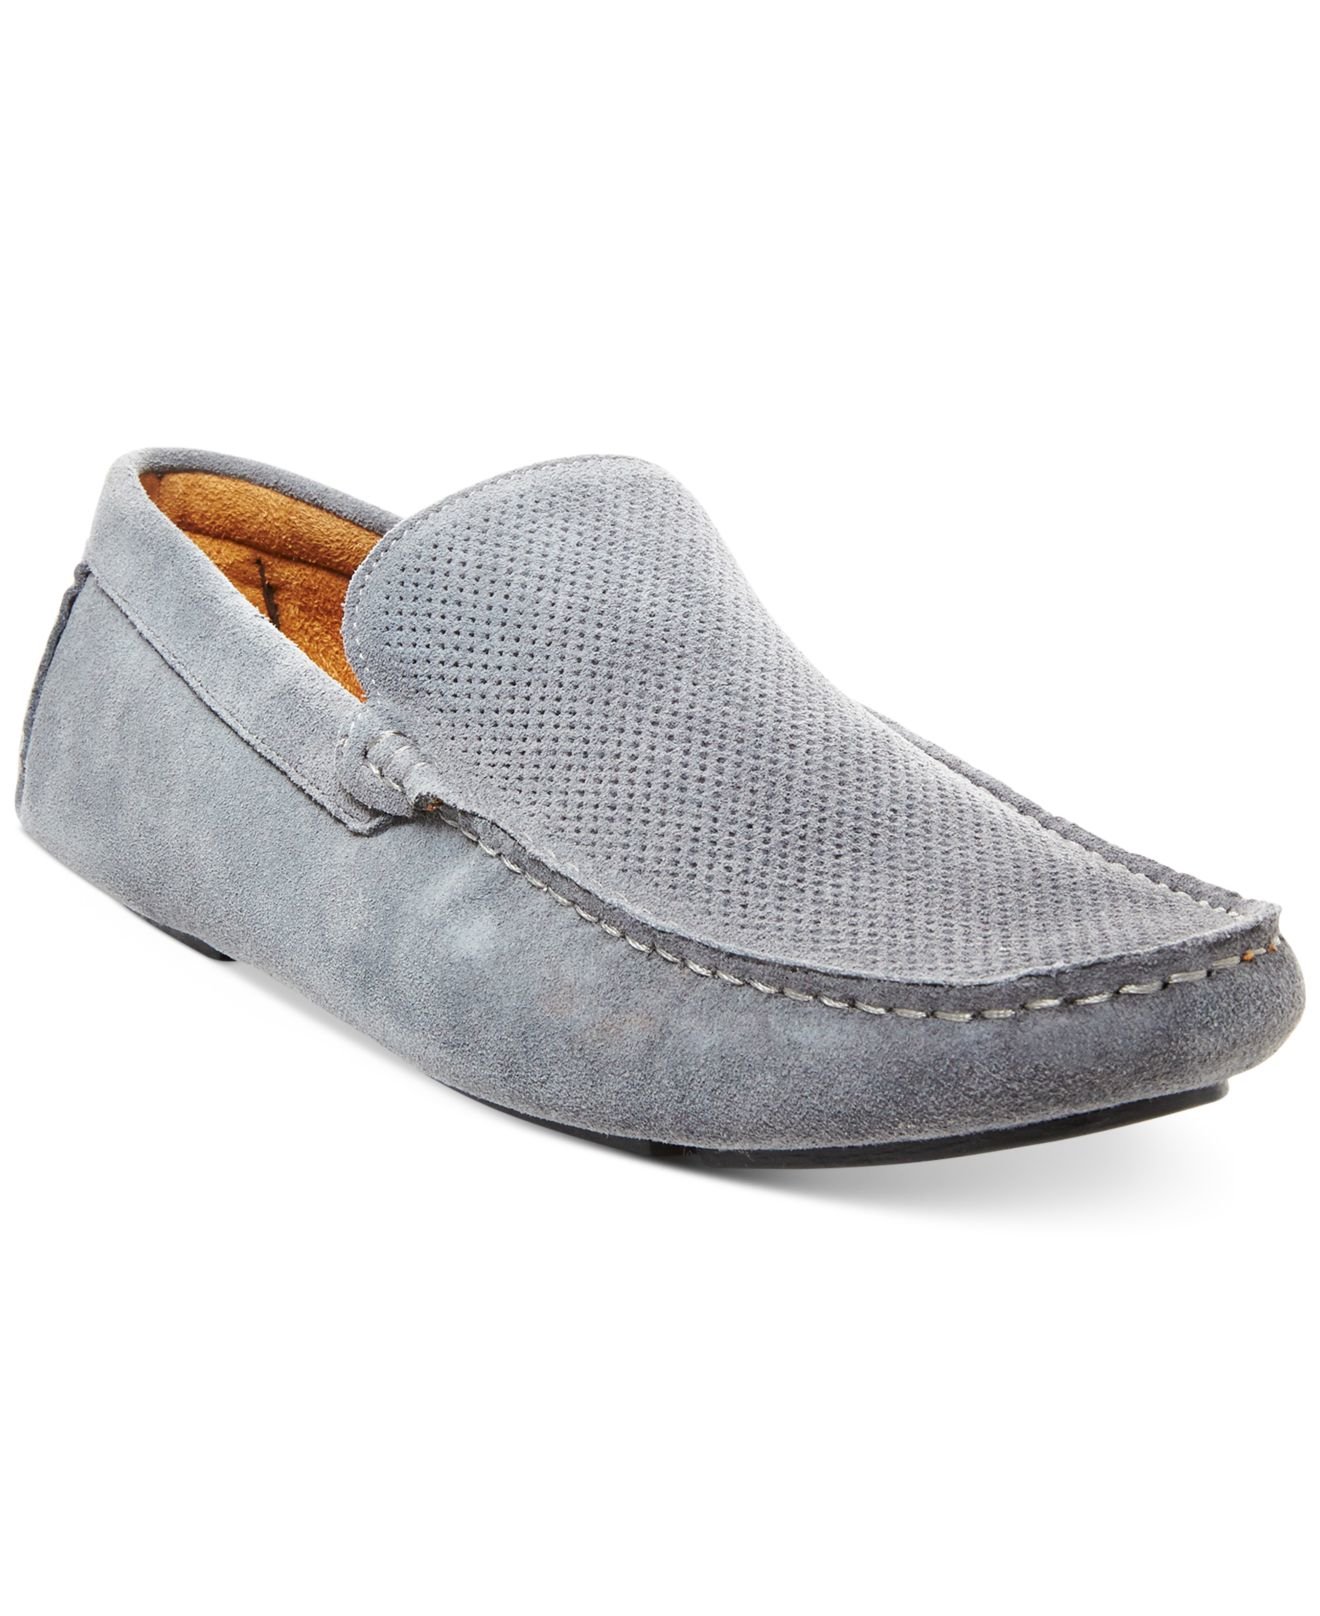 Steve Madden Suede Stitch Loafers in 